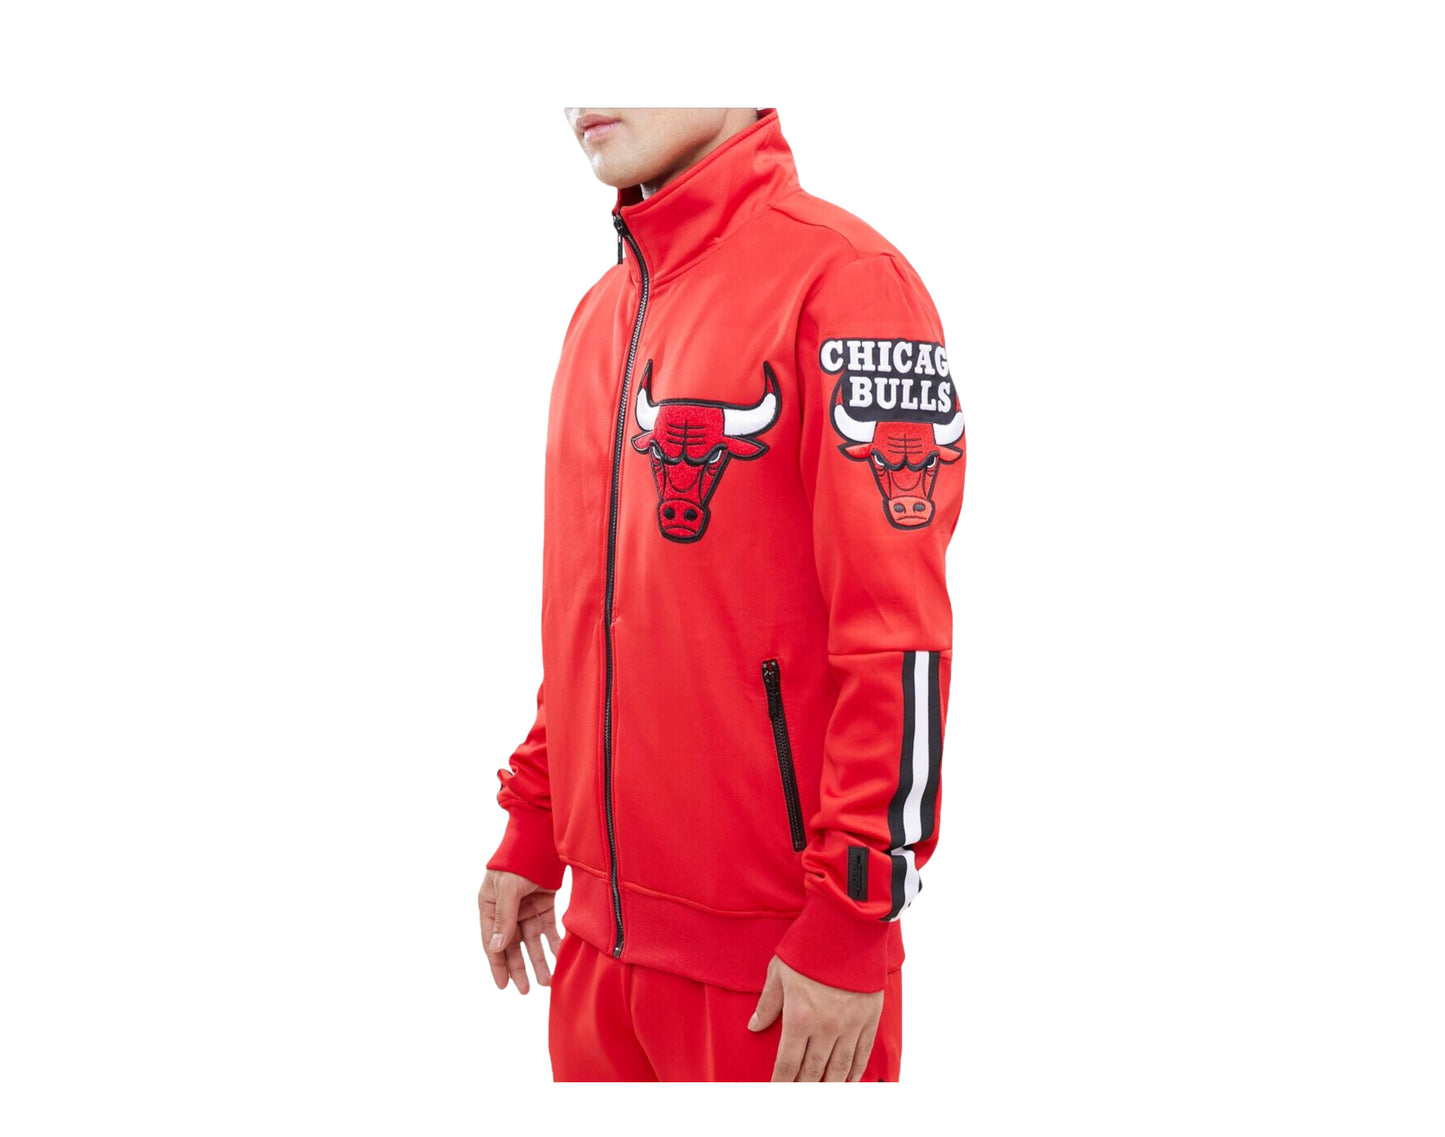 Official Chicago Bulls Jackets, Track Jackets, Pullovers, Coats